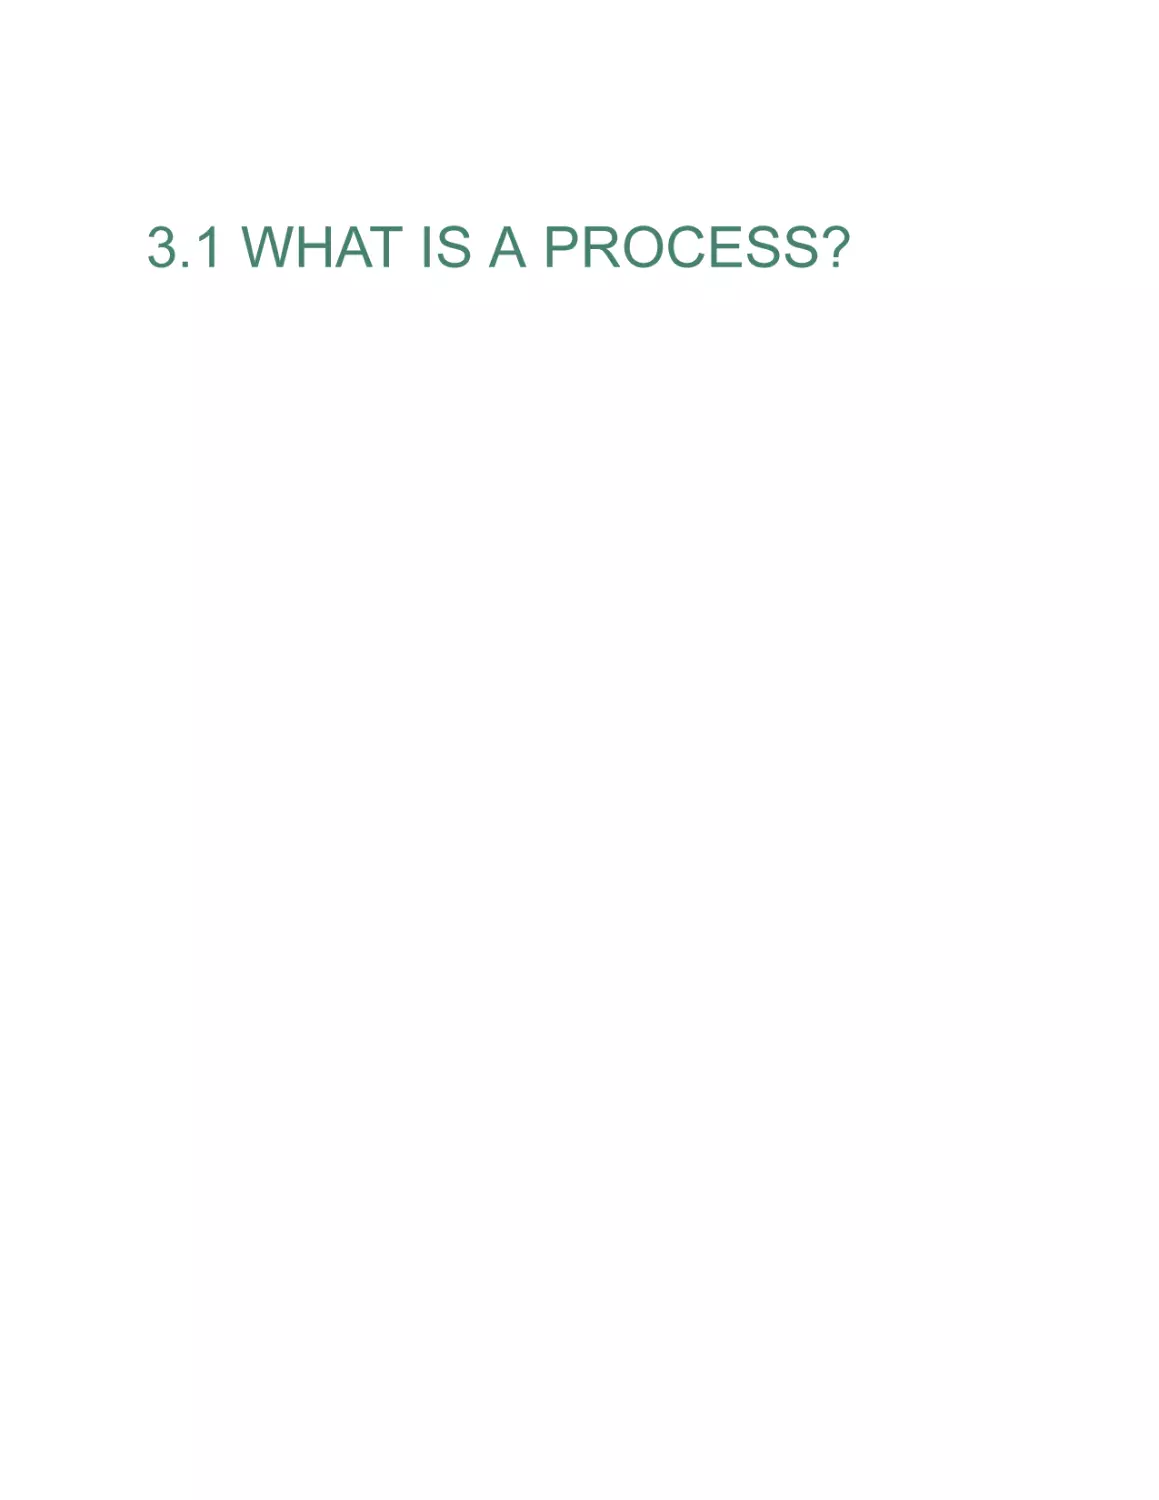 3.1 WHAT IS A PROCESS?